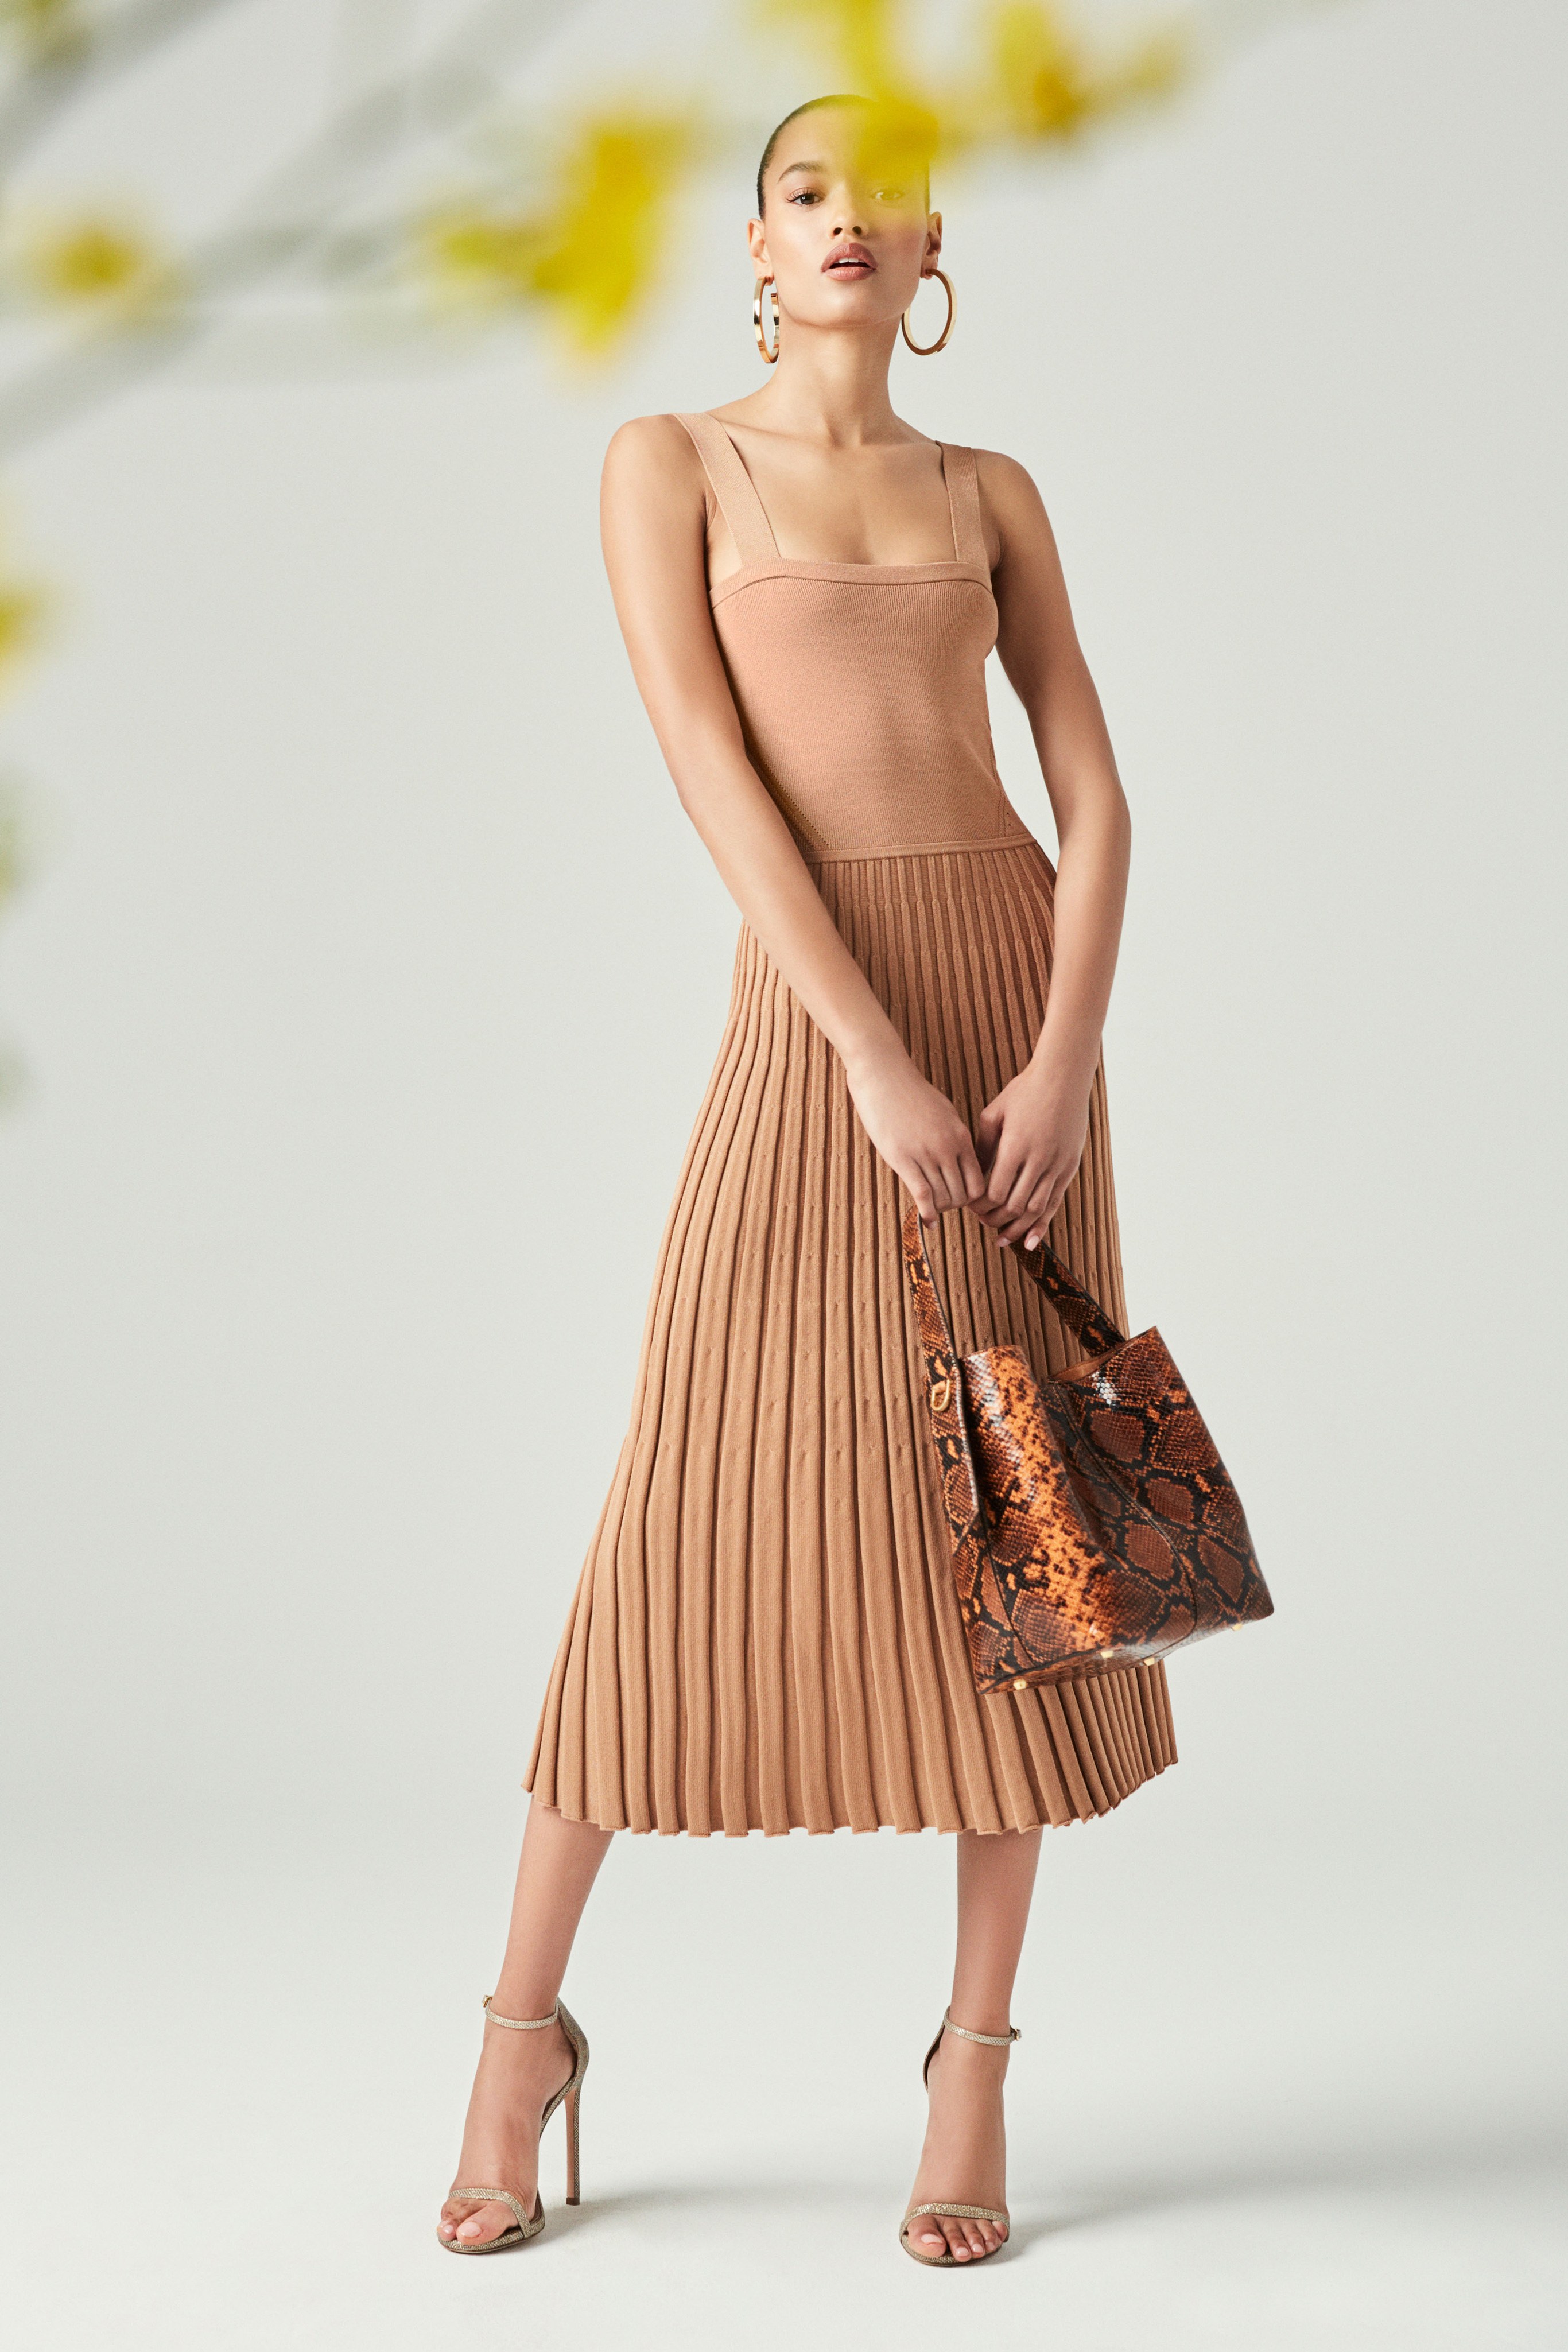 Highlights From the Resort 2020 Collections